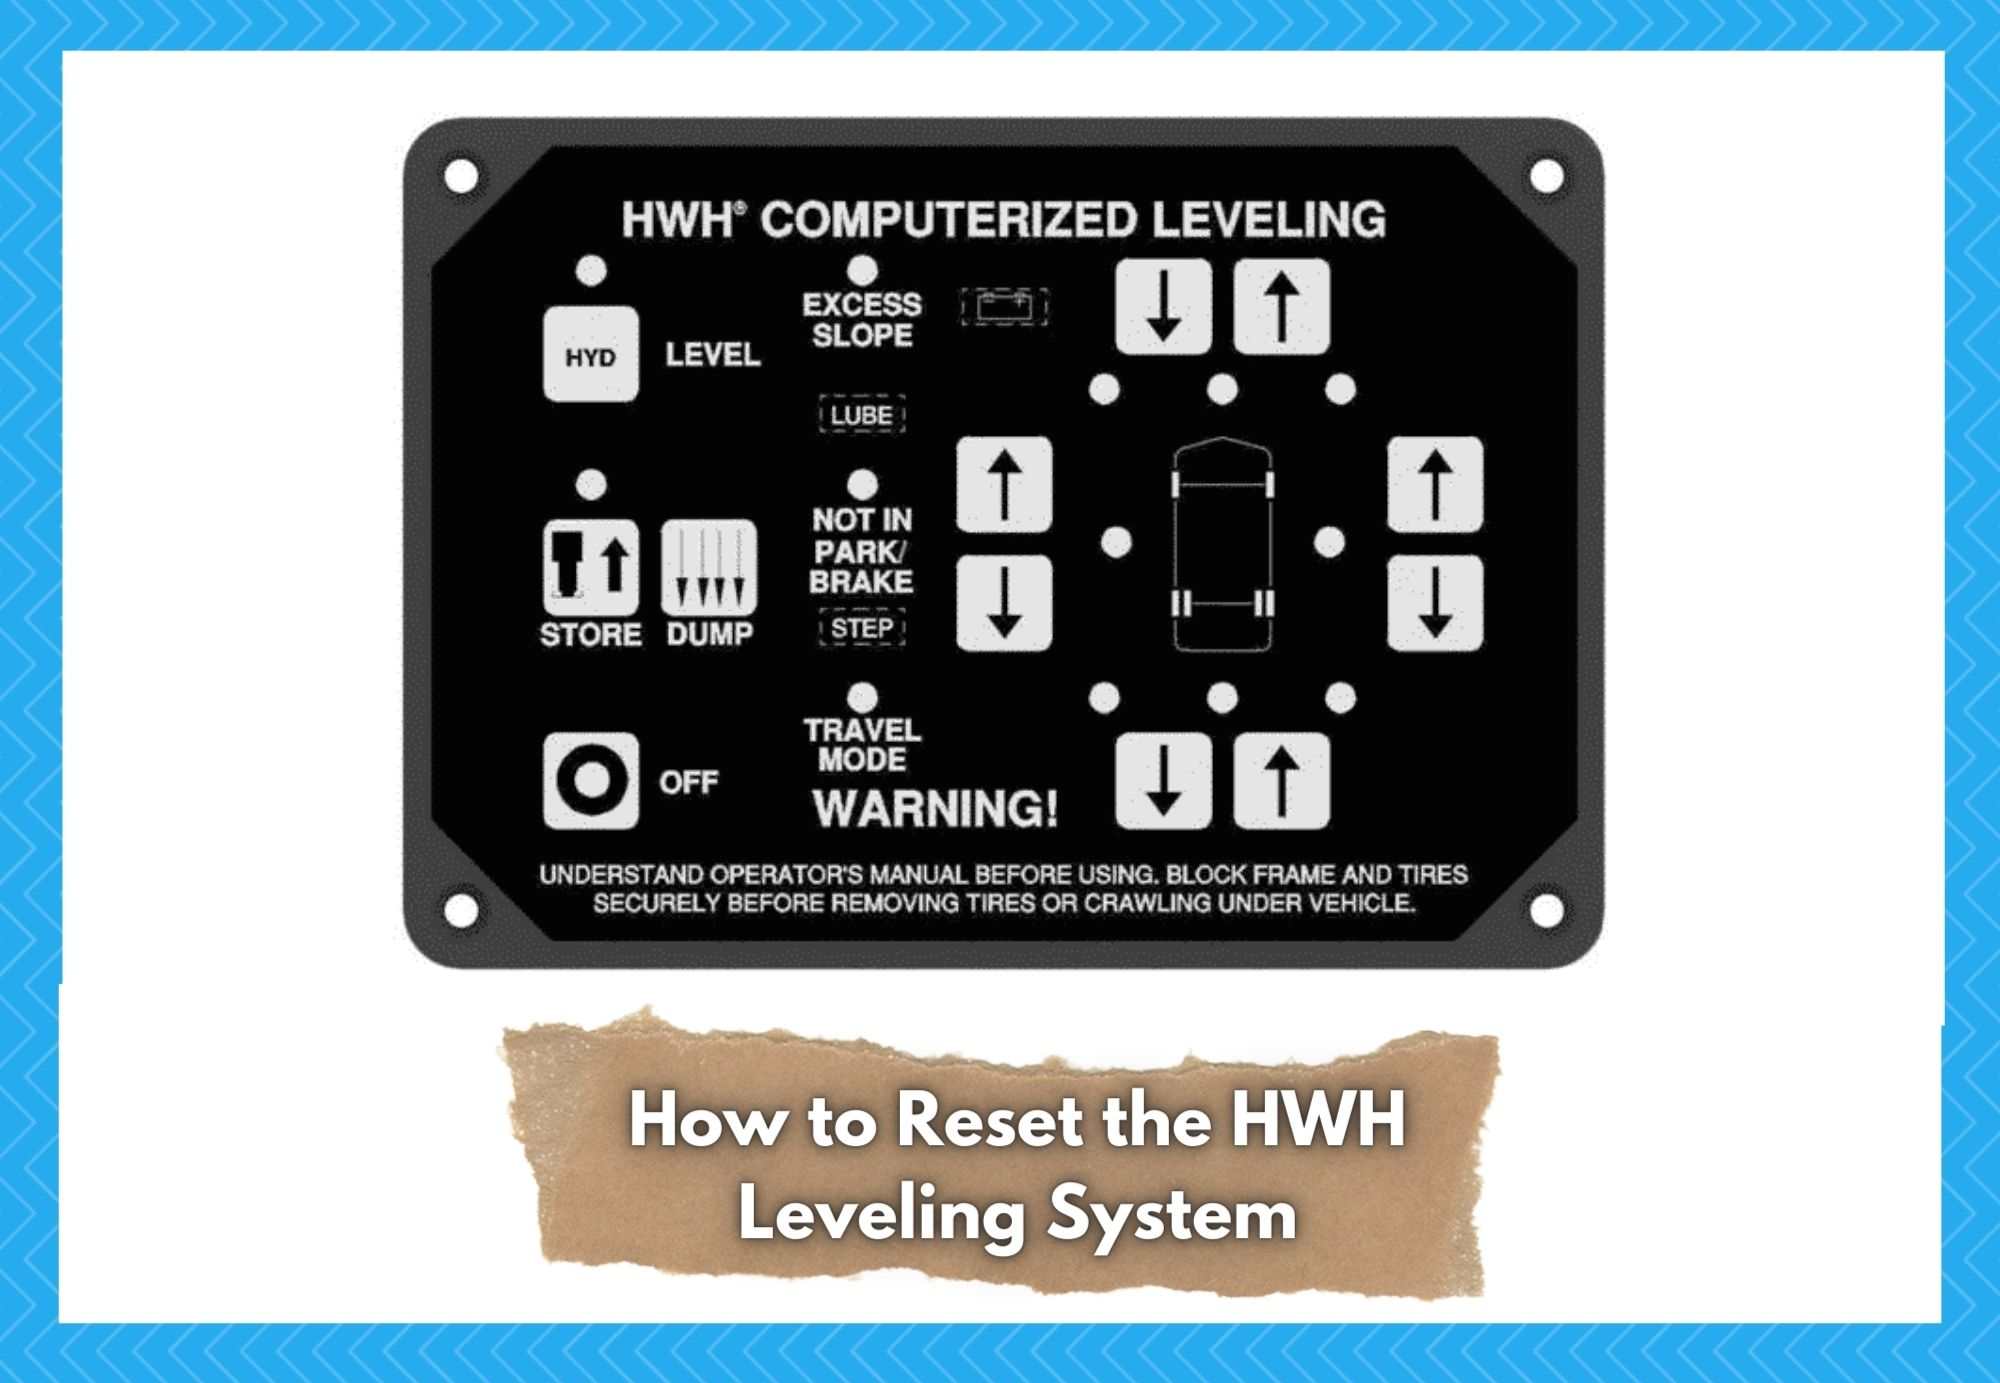 hwh leveling system reset